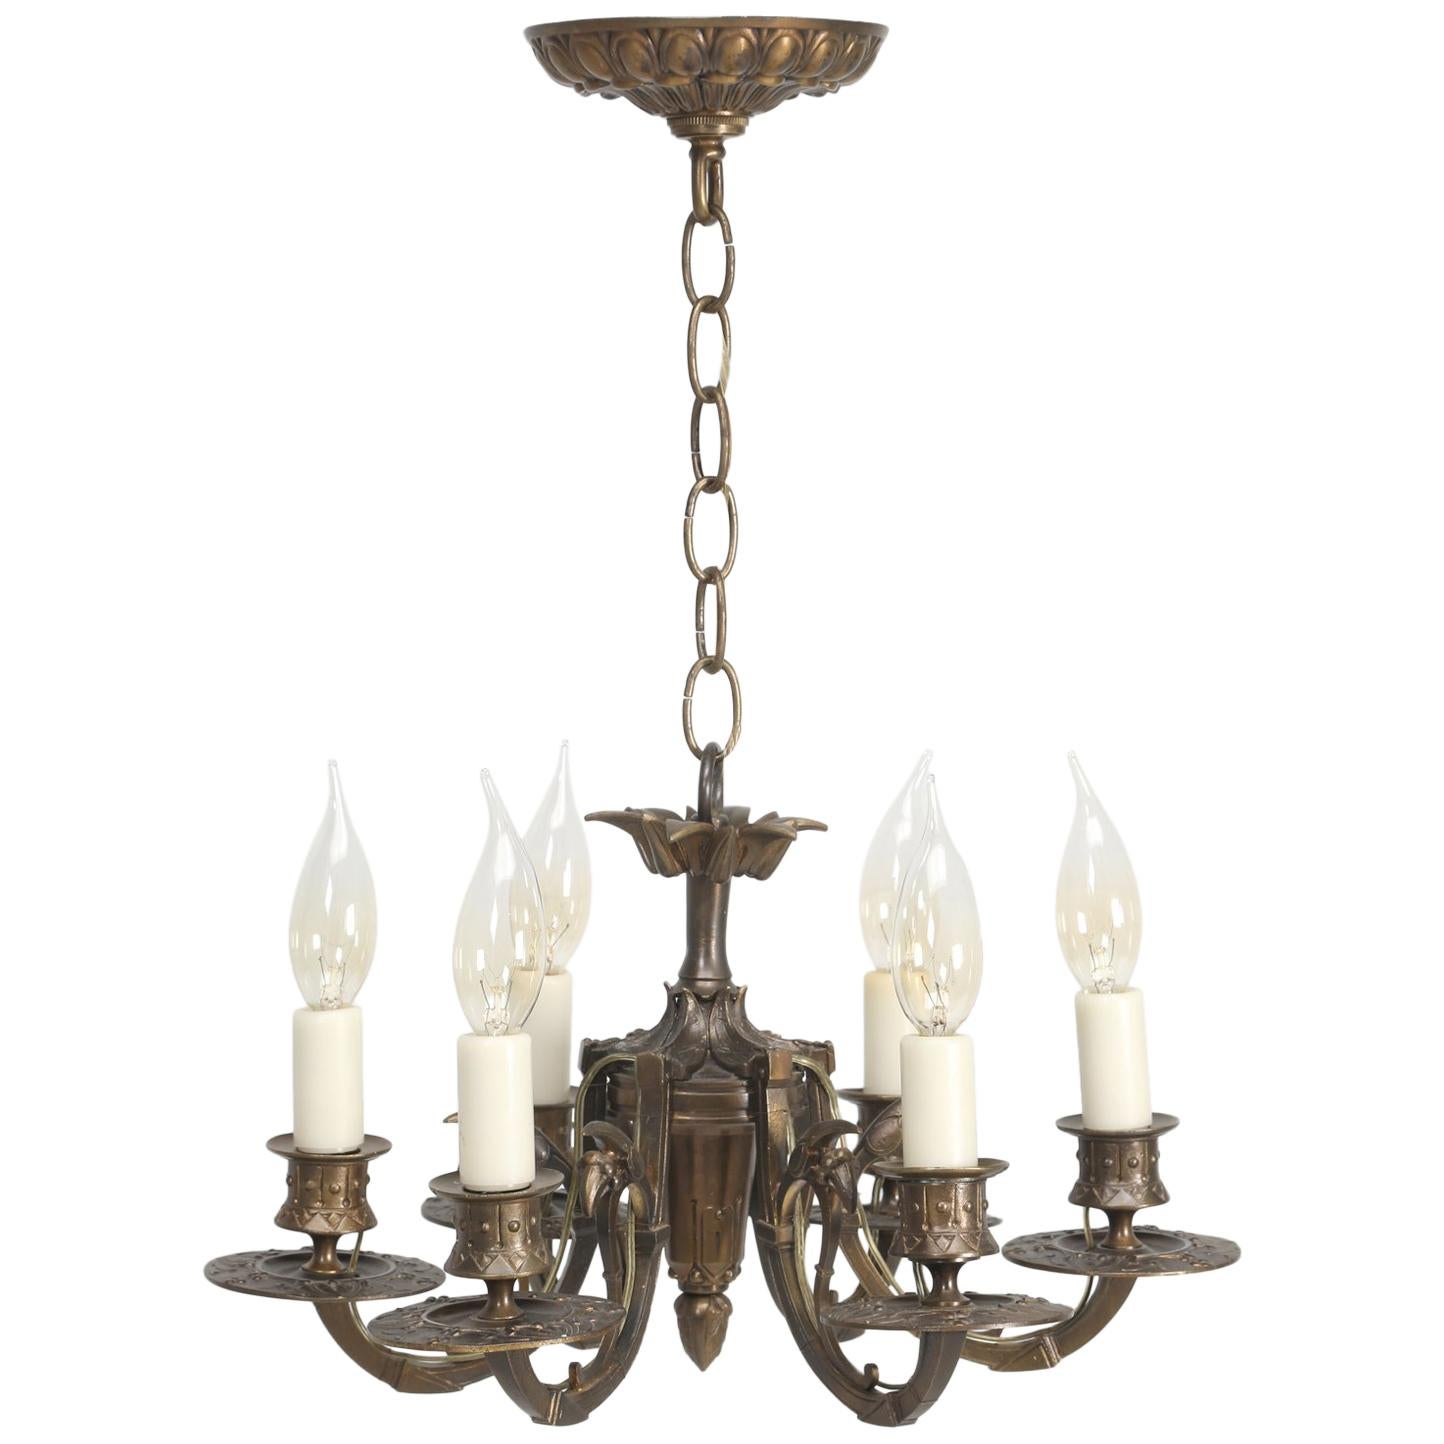 American Six-Light Chandelier Made of Solid Brass